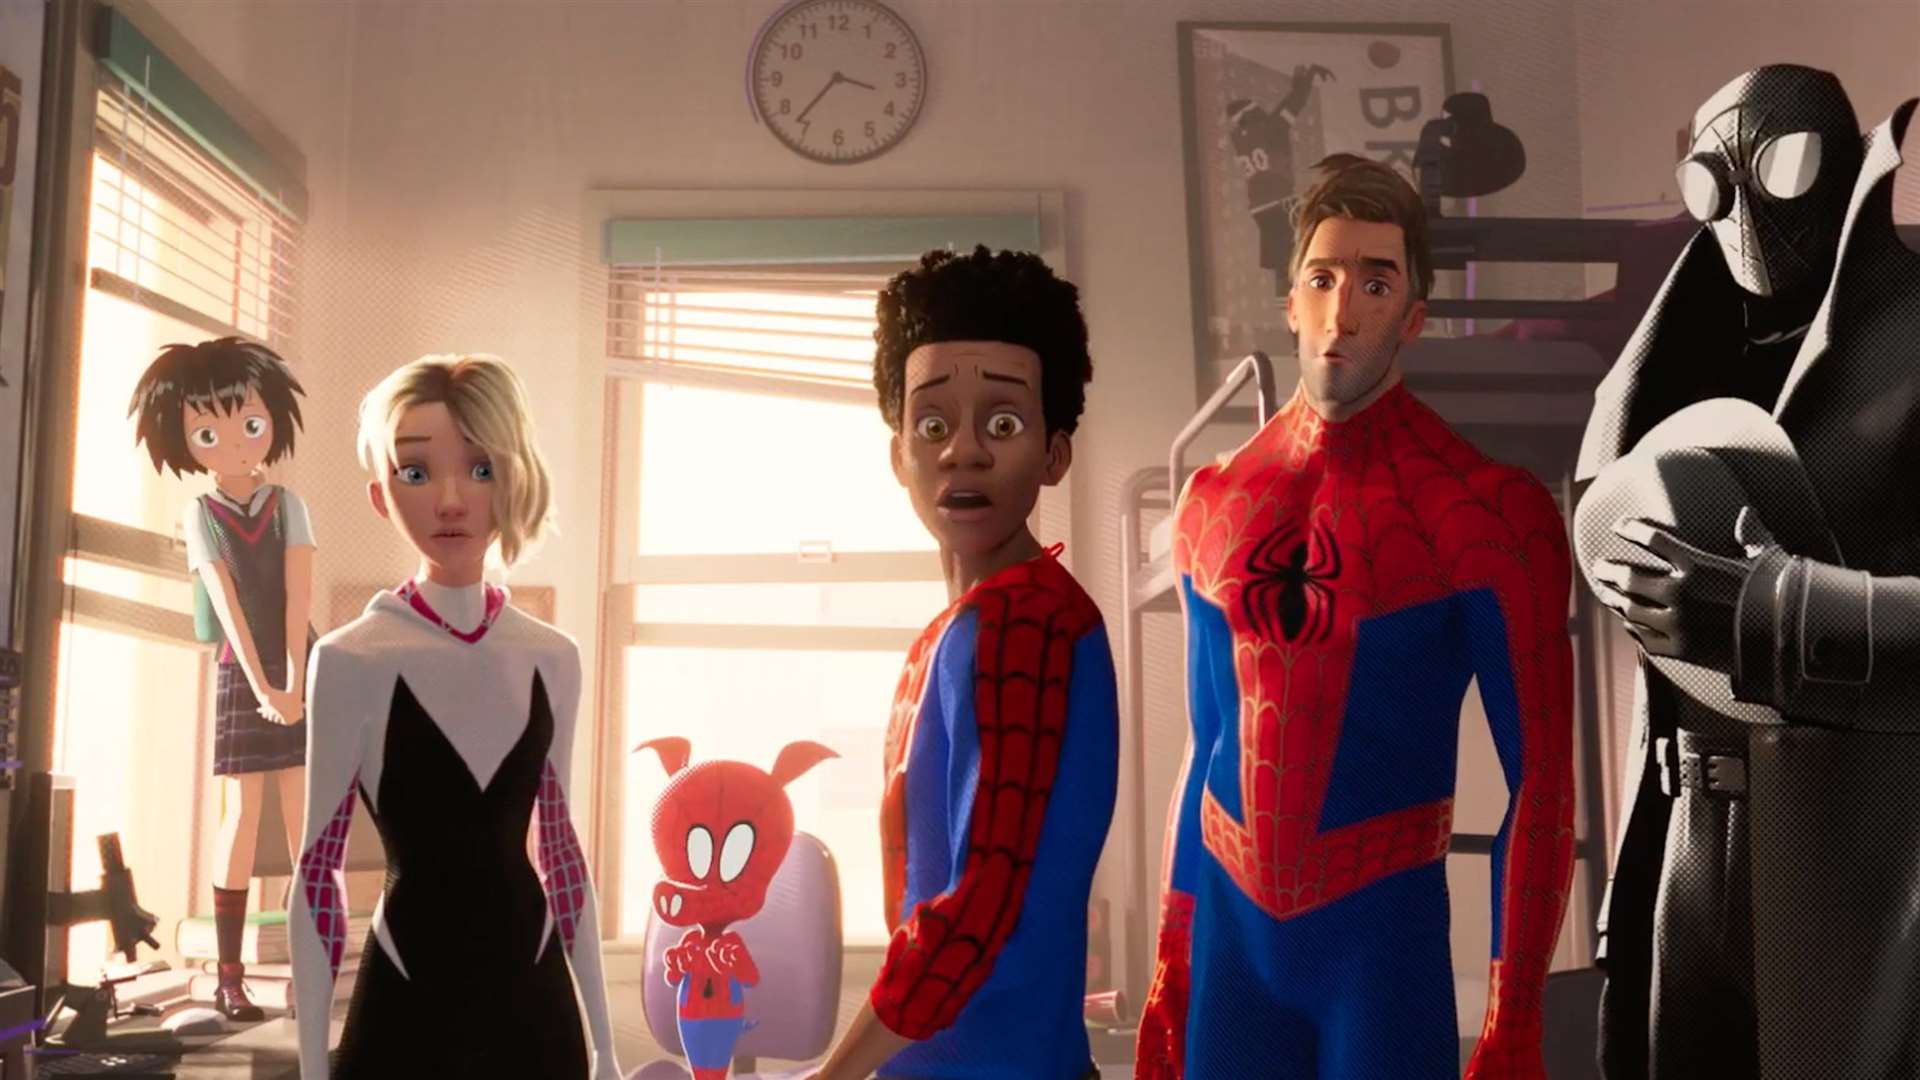 Catch Spider-Man this weekend at Odeon's Kids Club